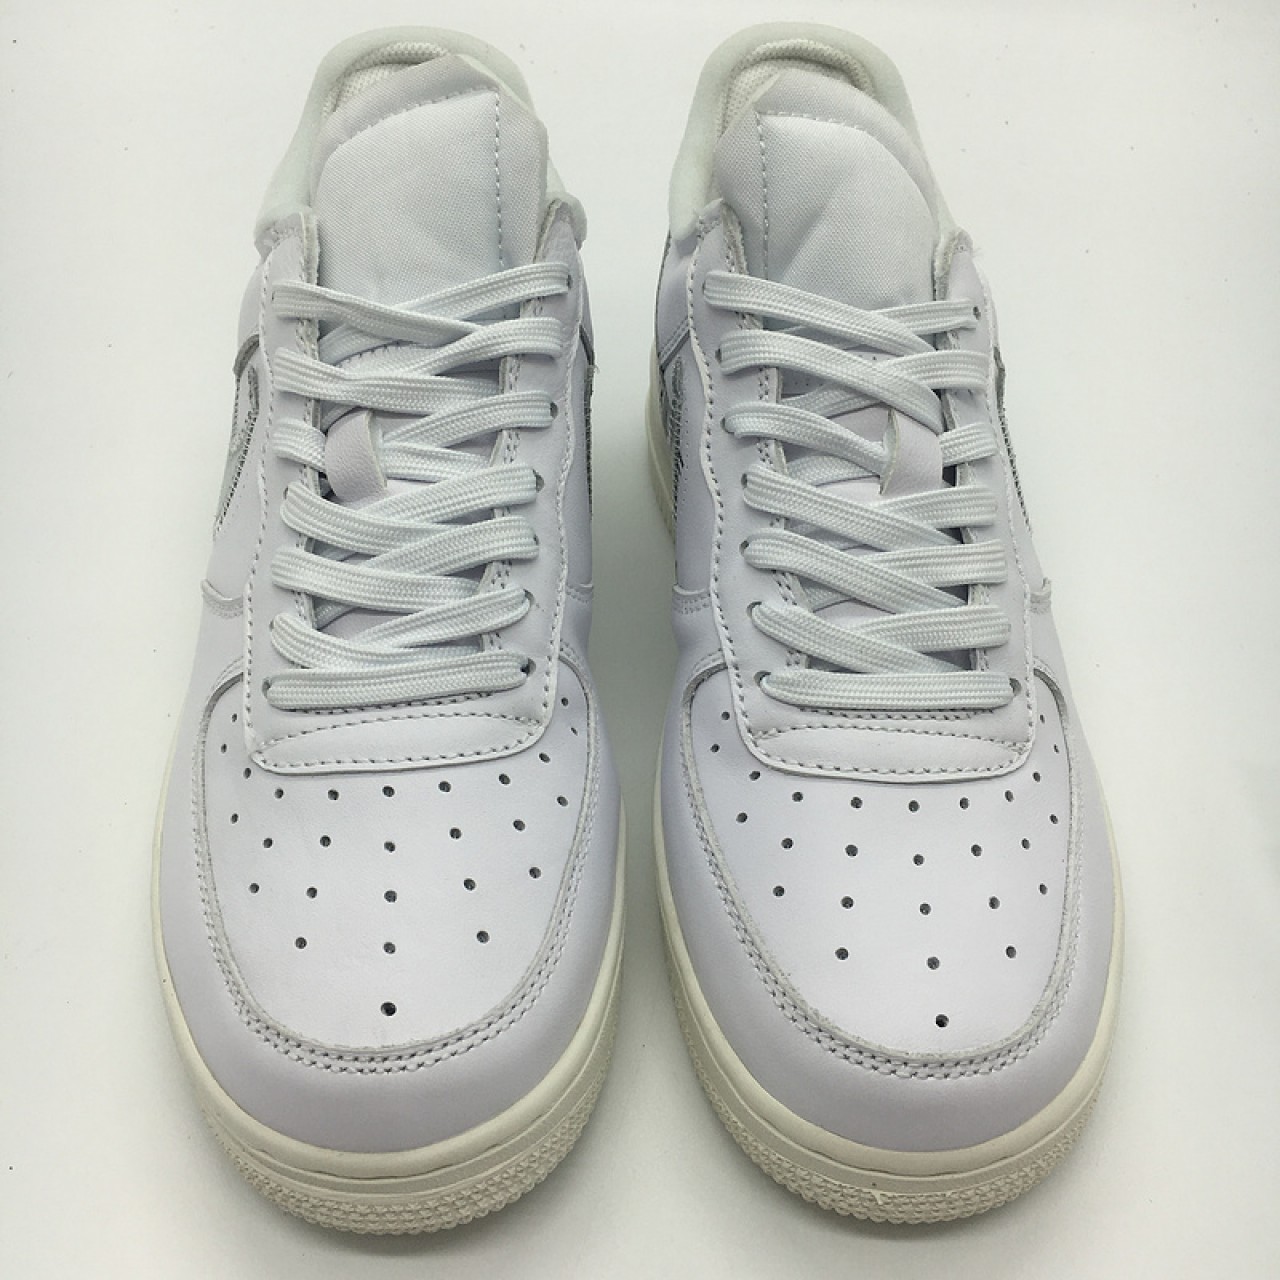 Buy PK God Batch Men's Nike Air Force 1 OFF WHITE COMPLEX CON AO4297-100 Online.